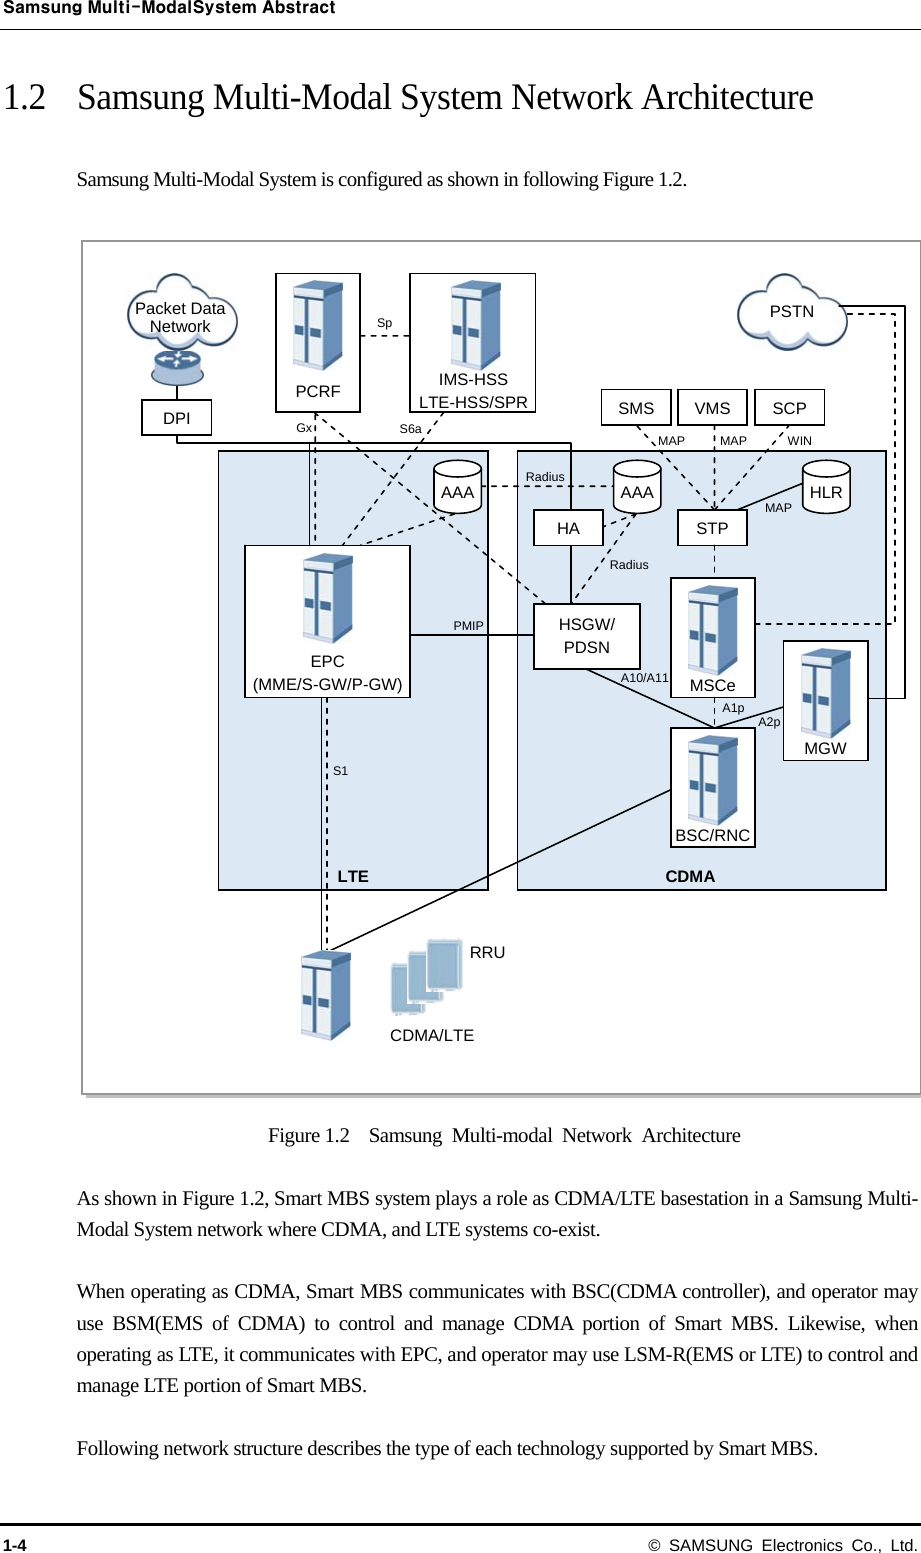 Samsung Multi-ModalSystem Abstract 1-4 © SAMSUNG Electronics Co., Ltd. 1.2 Samsung Multi-Modal System Network Architecture  Samsung Multi-Modal System is configured as shown in following Figure 1.2.   Figure 1.2  Samsung Multi-modal Network Architecture  As shown in Figure 1.2, Smart MBS system plays a role as CDMA/LTE basestation in a Samsung Multi-Modal System network where CDMA, and LTE systems co-exist.      When operating as CDMA, Smart MBS communicates with BSC(CDMA controller), and operator may use BSM(EMS of CDMA) to control and manage CDMA portion of Smart MBS. Likewise, when operating as LTE, it communicates with EPC, and operator may use LSM-R(EMS or LTE) to control and manage LTE portion of Smart MBS.  Following network structure describes the type of each technology supported by Smart MBS.   PSTN SMS VMS SCP CDMA LTE STPHLR MAP MAP MAP  WIN AAA MSCe MGW BSC/RNC RRU CDMA/LTE PCRF  IMS-HSS LTE-HSS/SPR DPI HAHSGW/ PDSN EPC (MME/S-GW/P-GW) S1 AAA A10/A11 PMIP A1p  A2p Radius Radius Gx Sp S6a Packet Data Network 